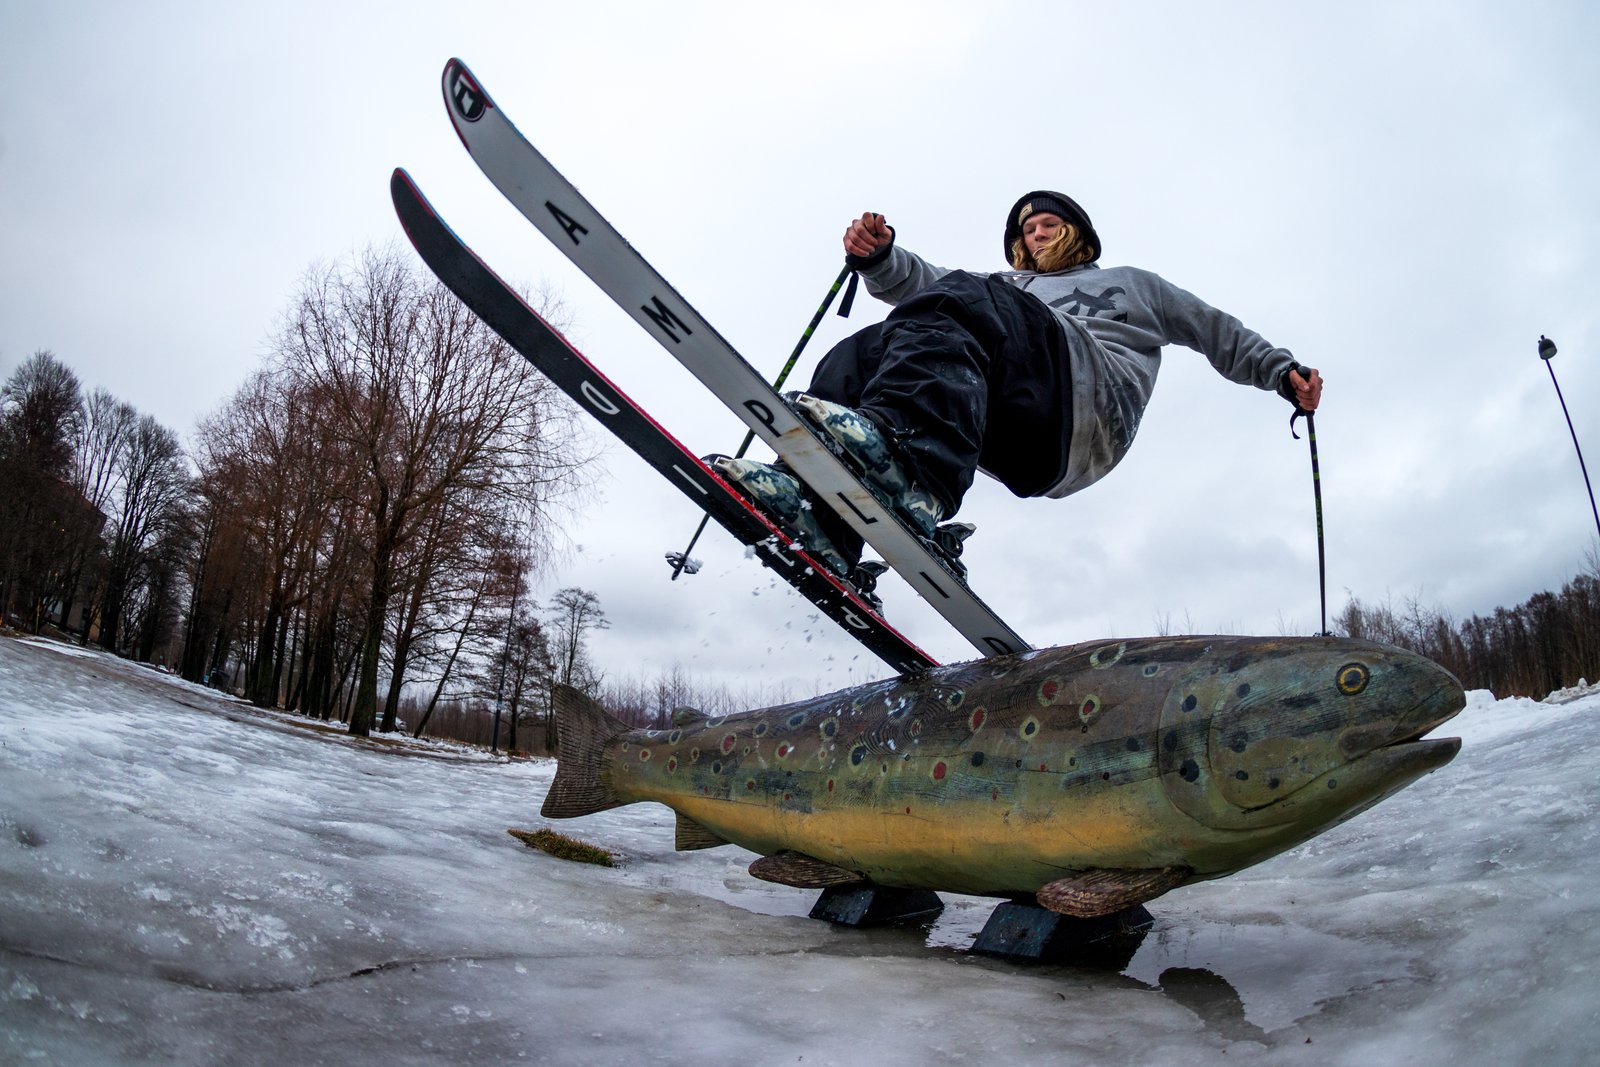 Skiing on a fish